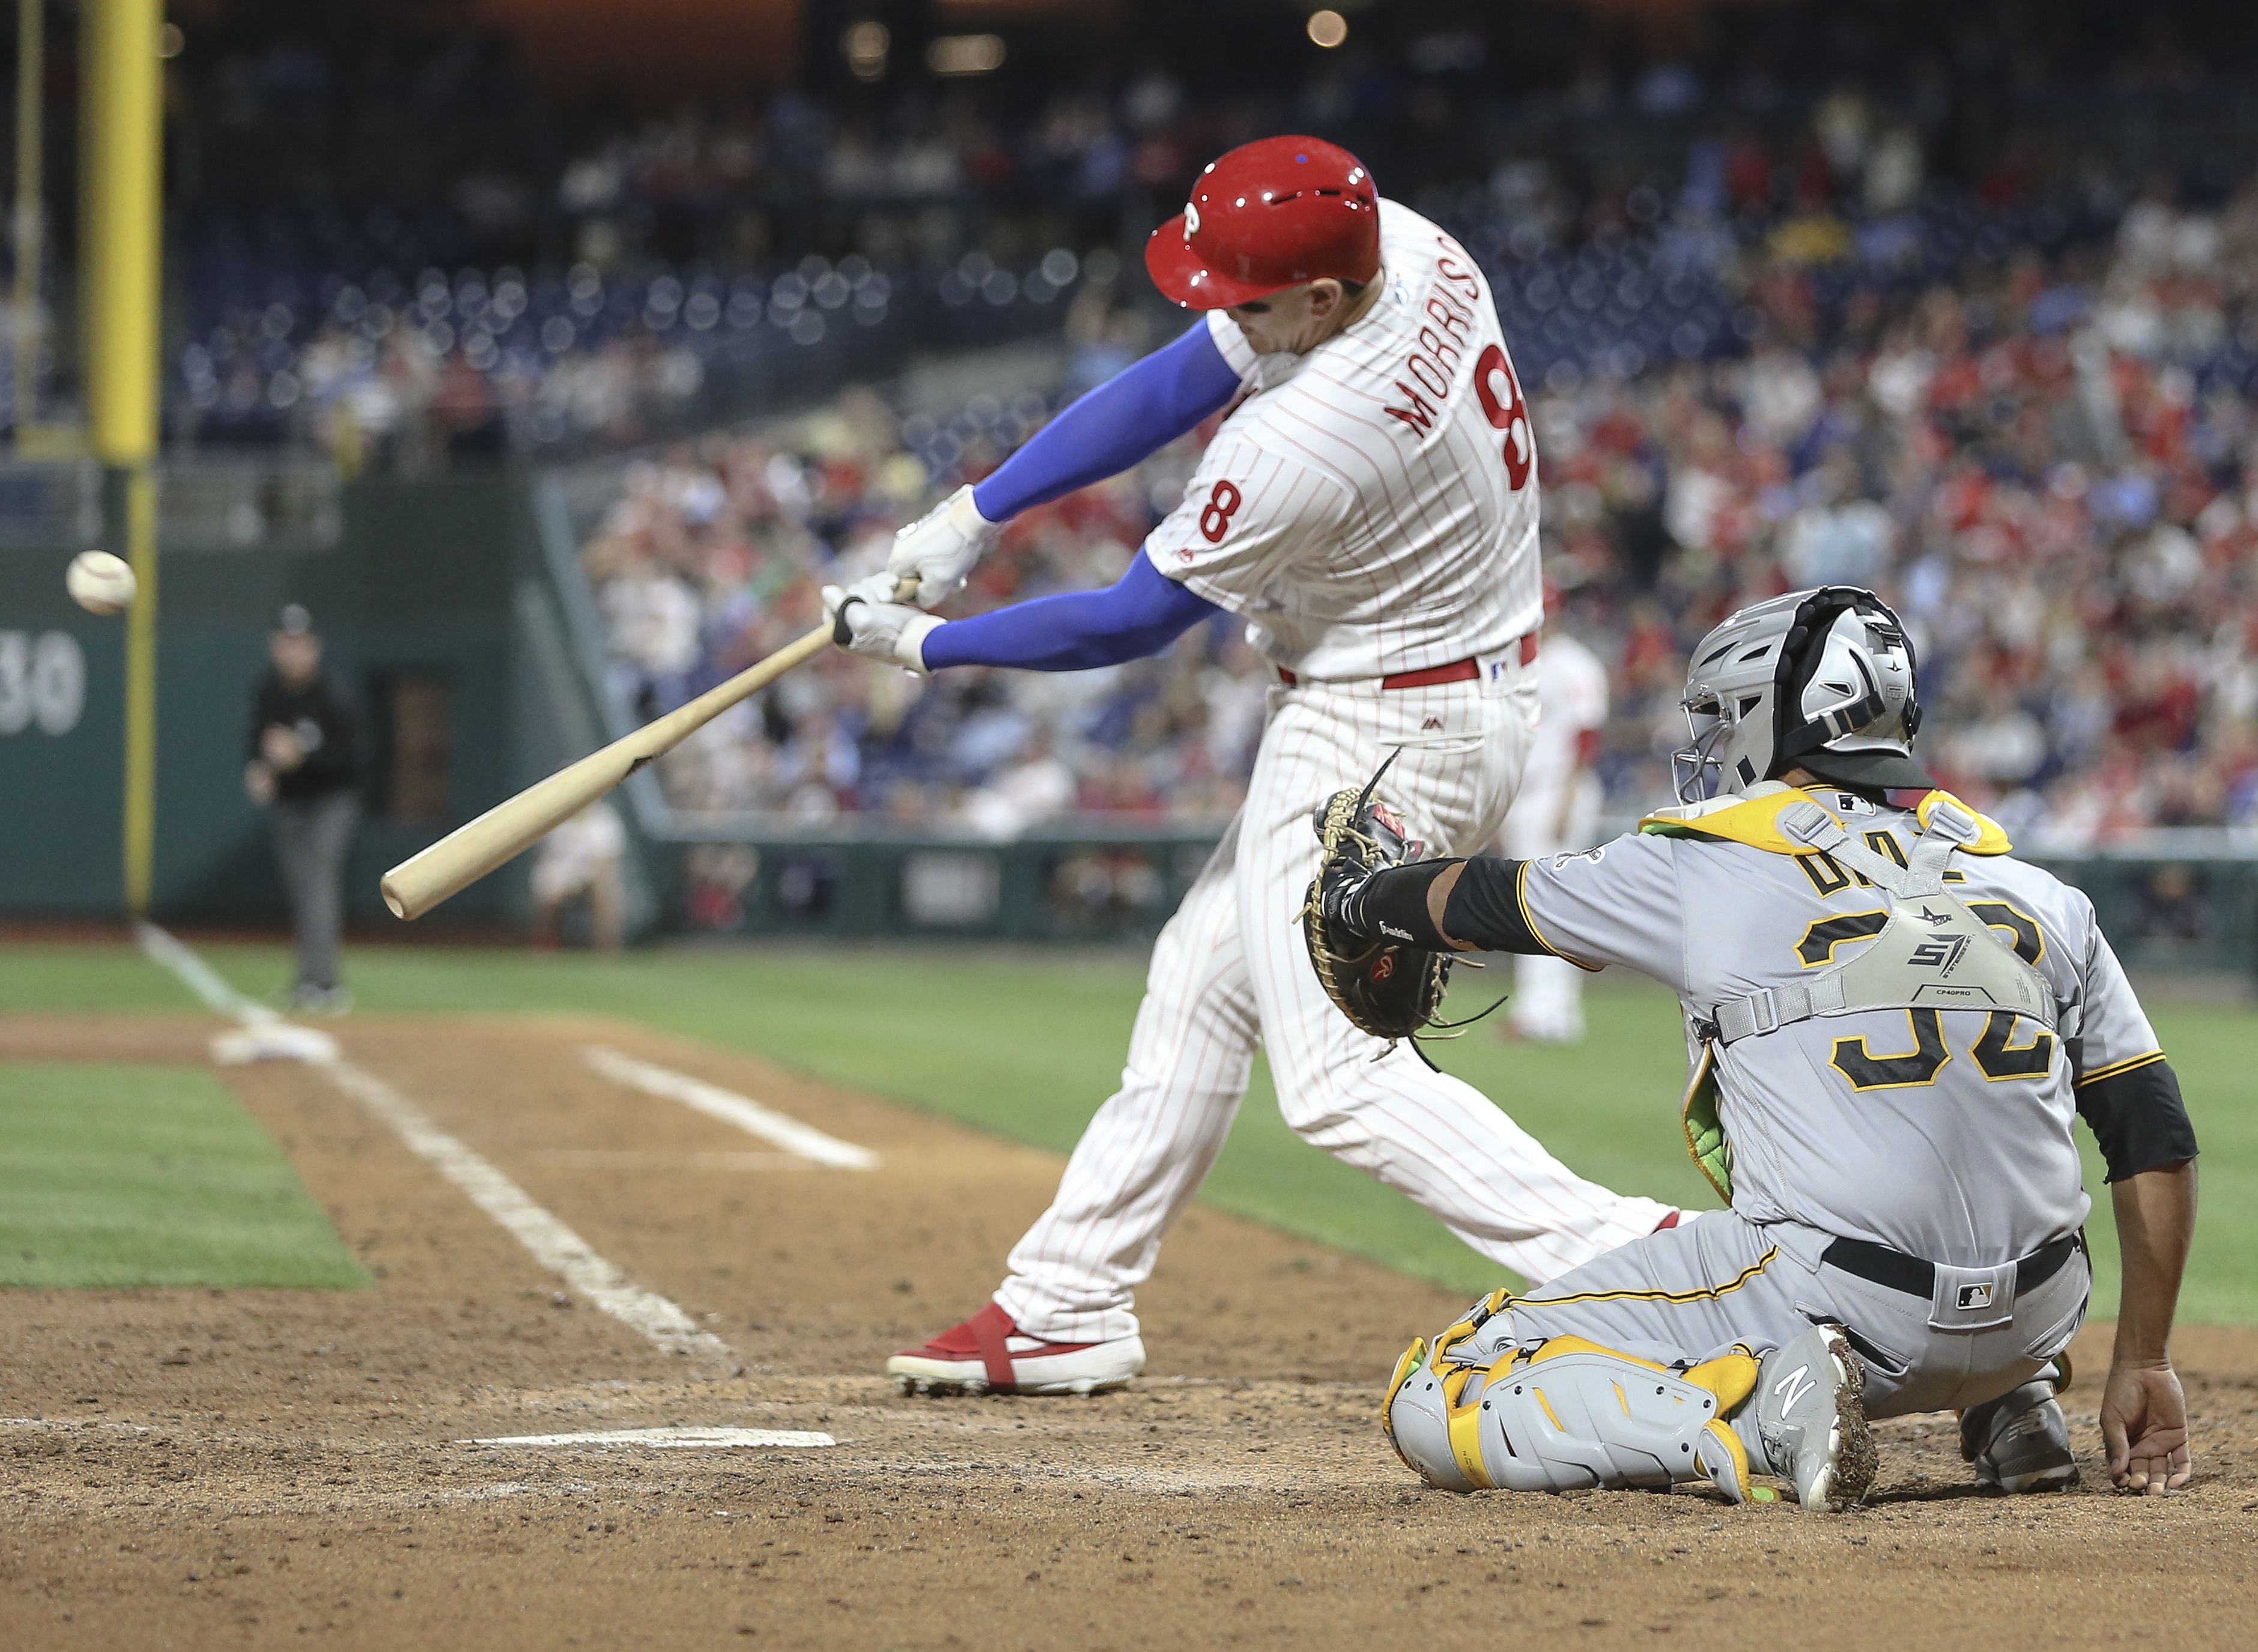 A fan might regret promising the Phillies nuggets if Rhys Hoskins homers 